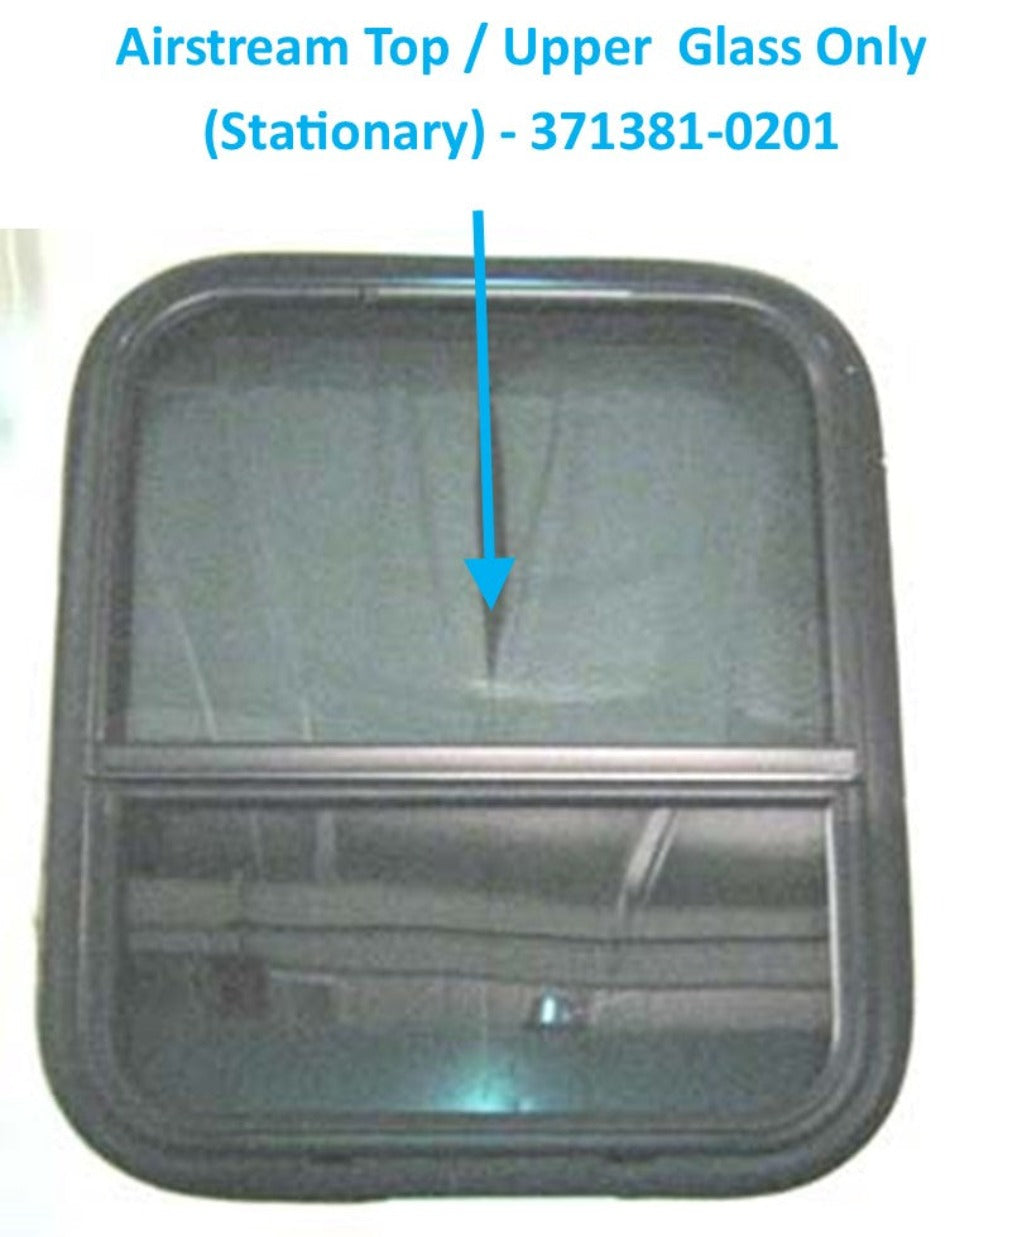 Airstream Top / Upper  Glass Only (Stationary) - 371381-0201